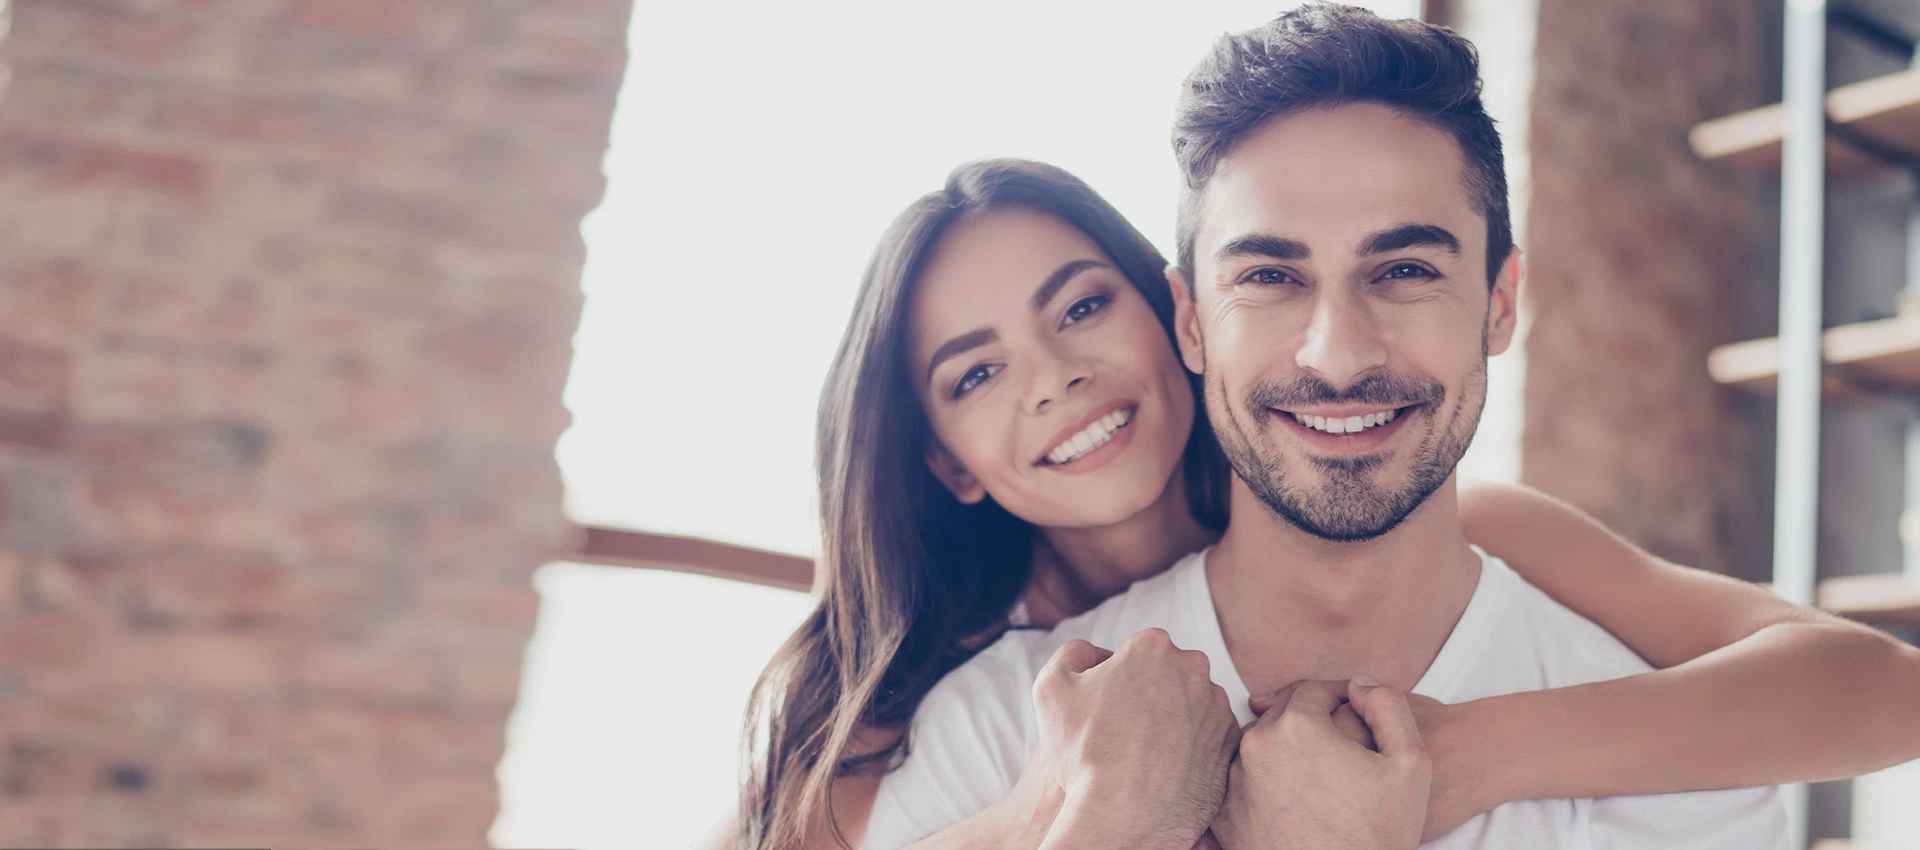 Joyful couple with perfect smiles with a softly blurred background emphasizes the positive outcome of dental care and health.